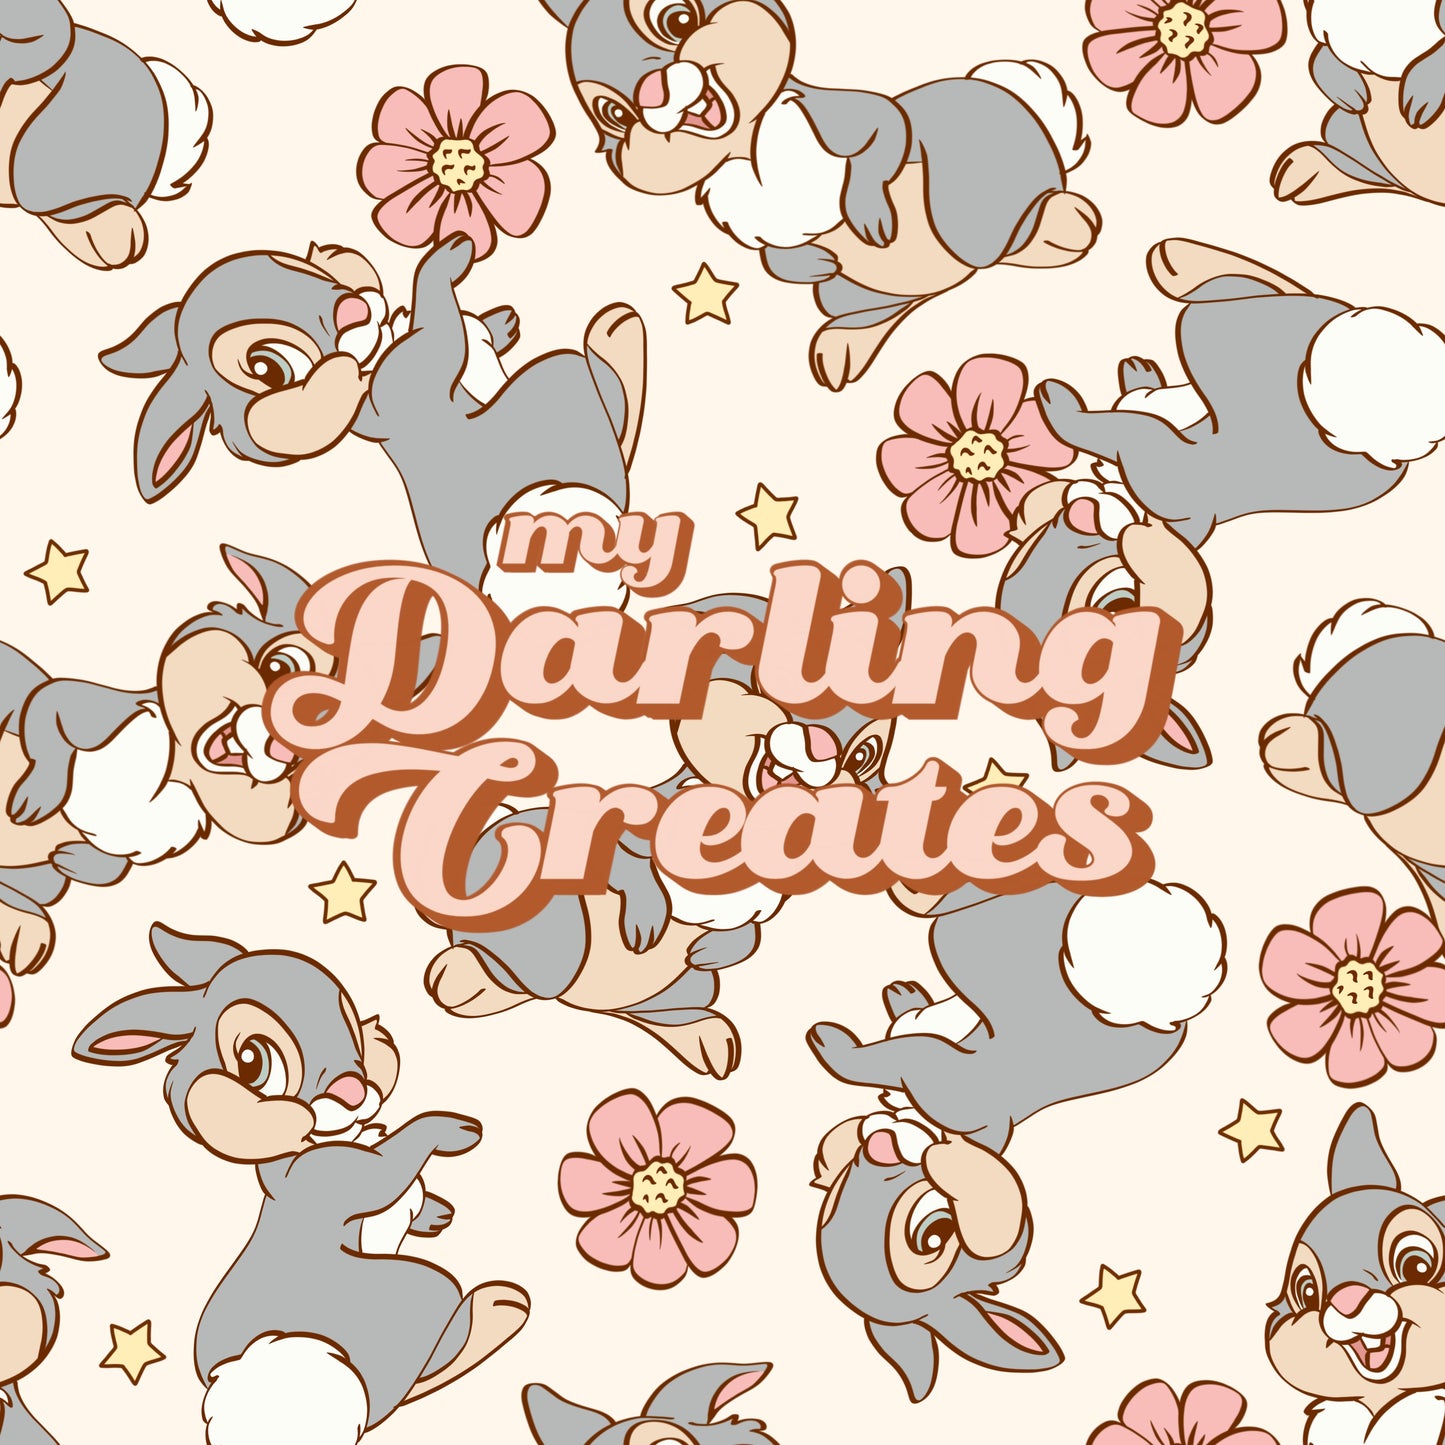 Some Bunny - Seamless Pattern